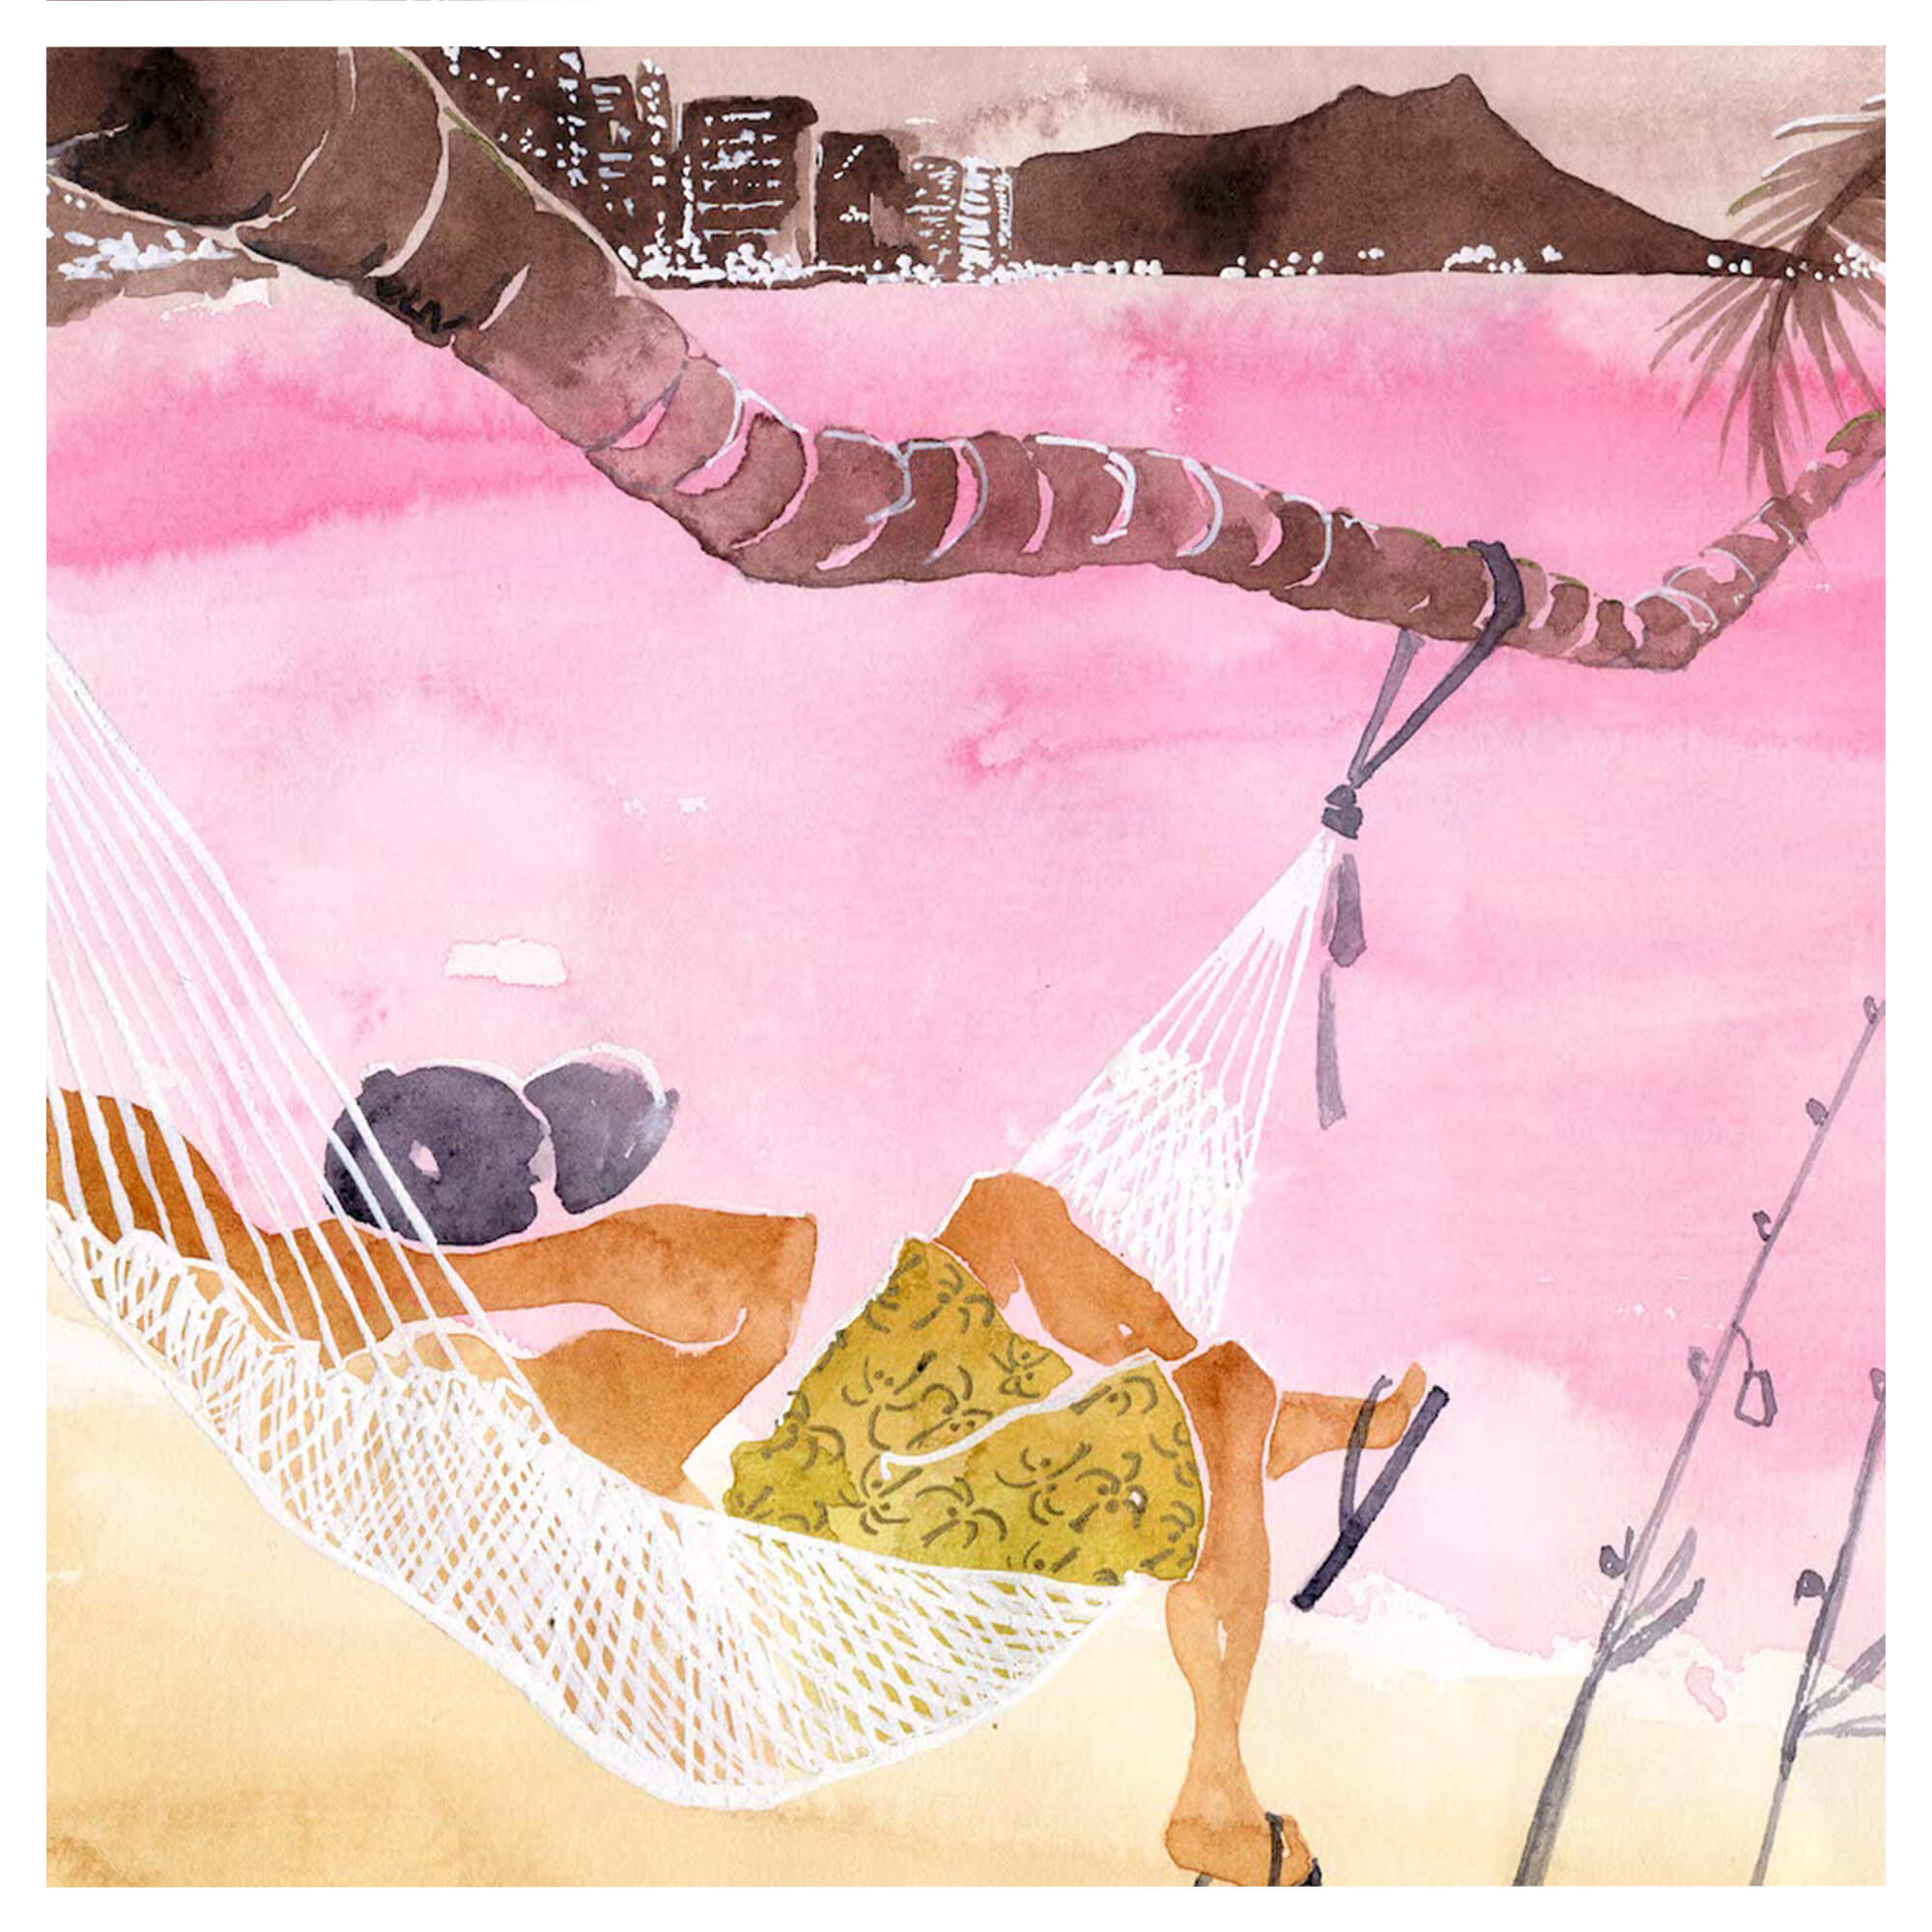 A distant view of the Diamond Head and a man relaxing in a hammock by Hawaii artist Lovisa Oliv